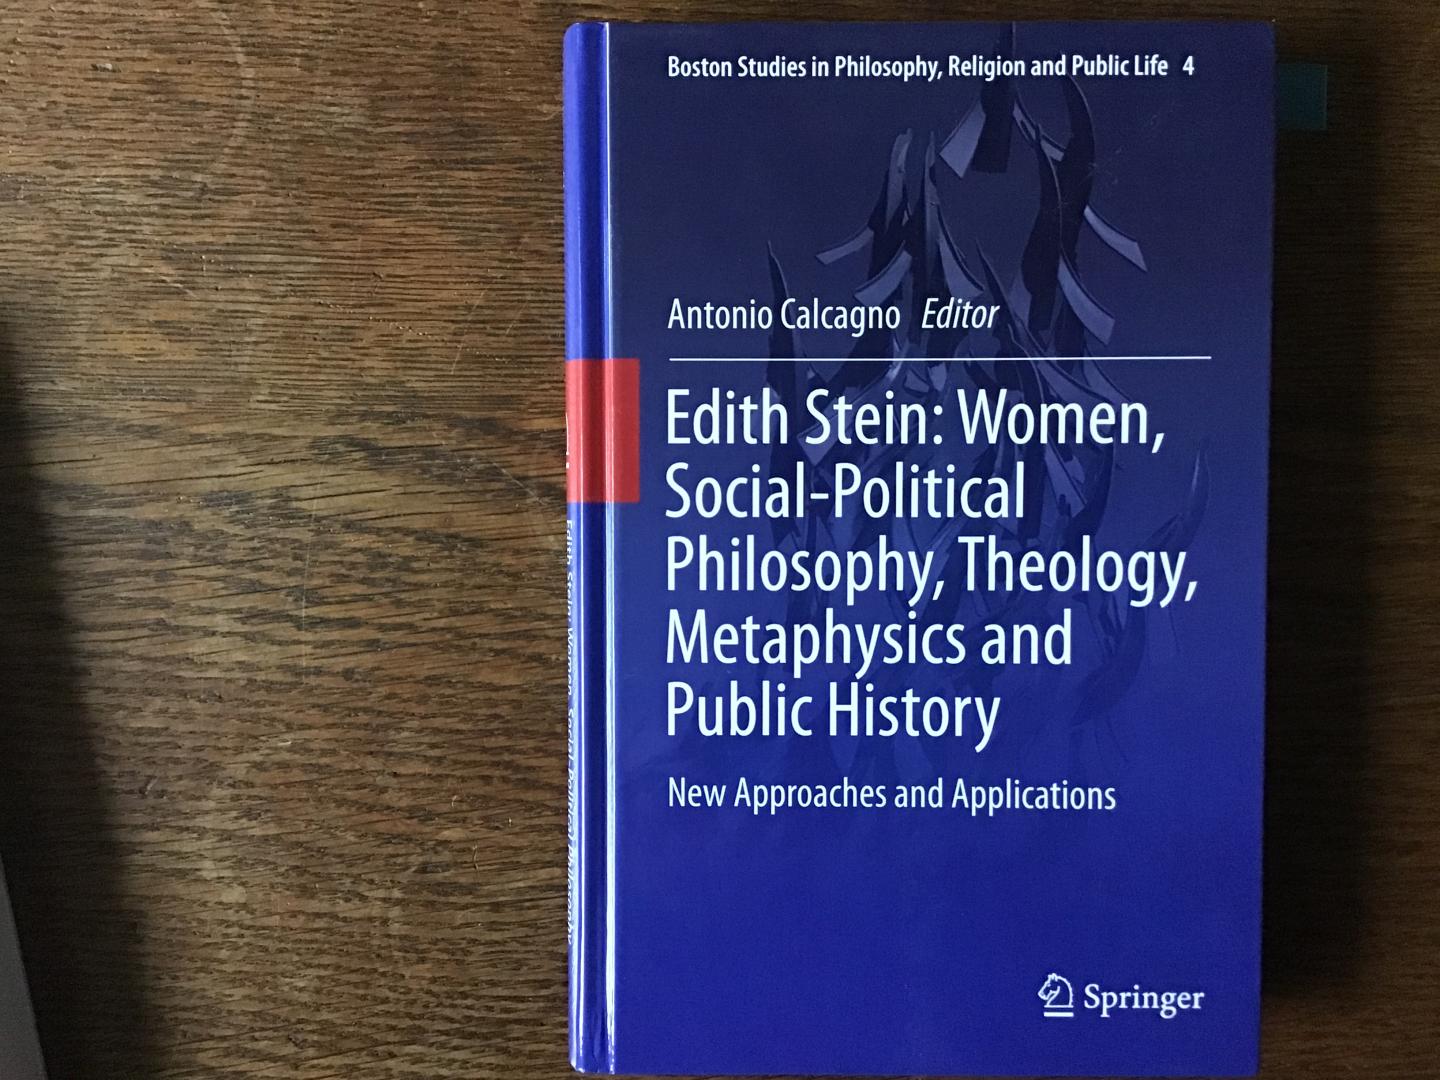 Calcagno, Antonio - Edith Stein: Women, Social-Political Philosophy, Theology, Metaphysics and Public History / New Approaches and Applications